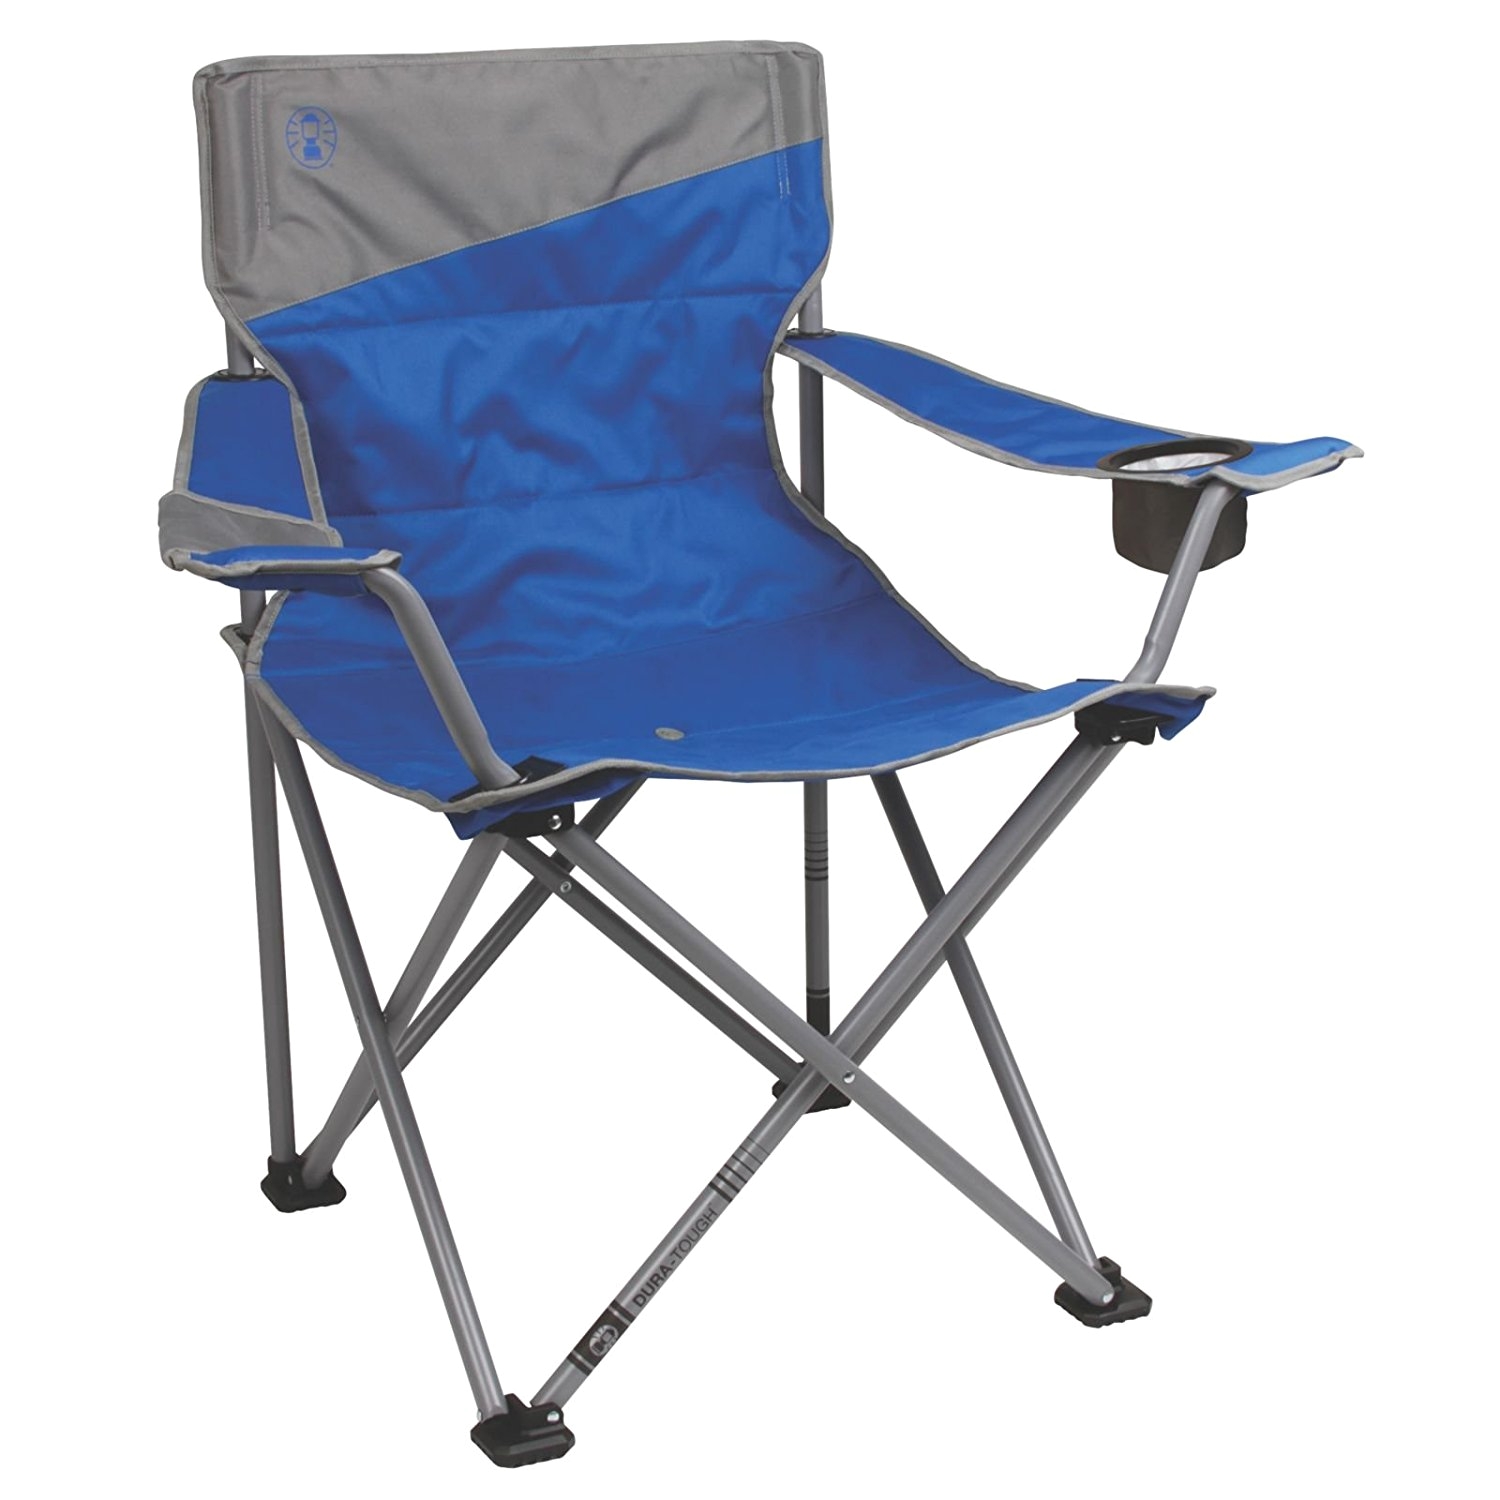 Alps Mountaineering King Kong Chair Uk Amazon Com Coleman 2000026491 Big N Tall Quad Camping Chair